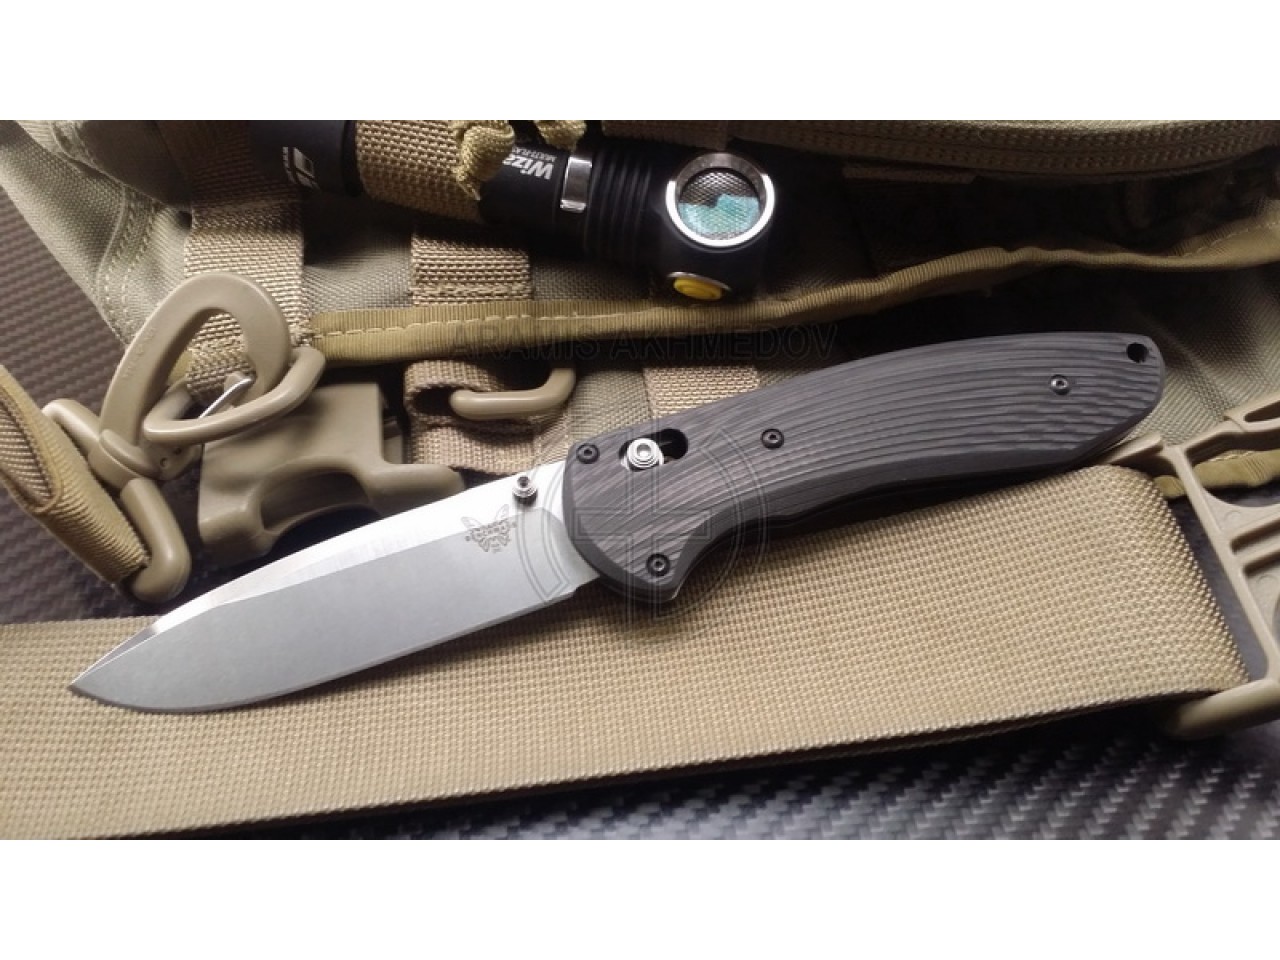 Custome scales Elegant - Line , for Benchmade Boost 590 knife